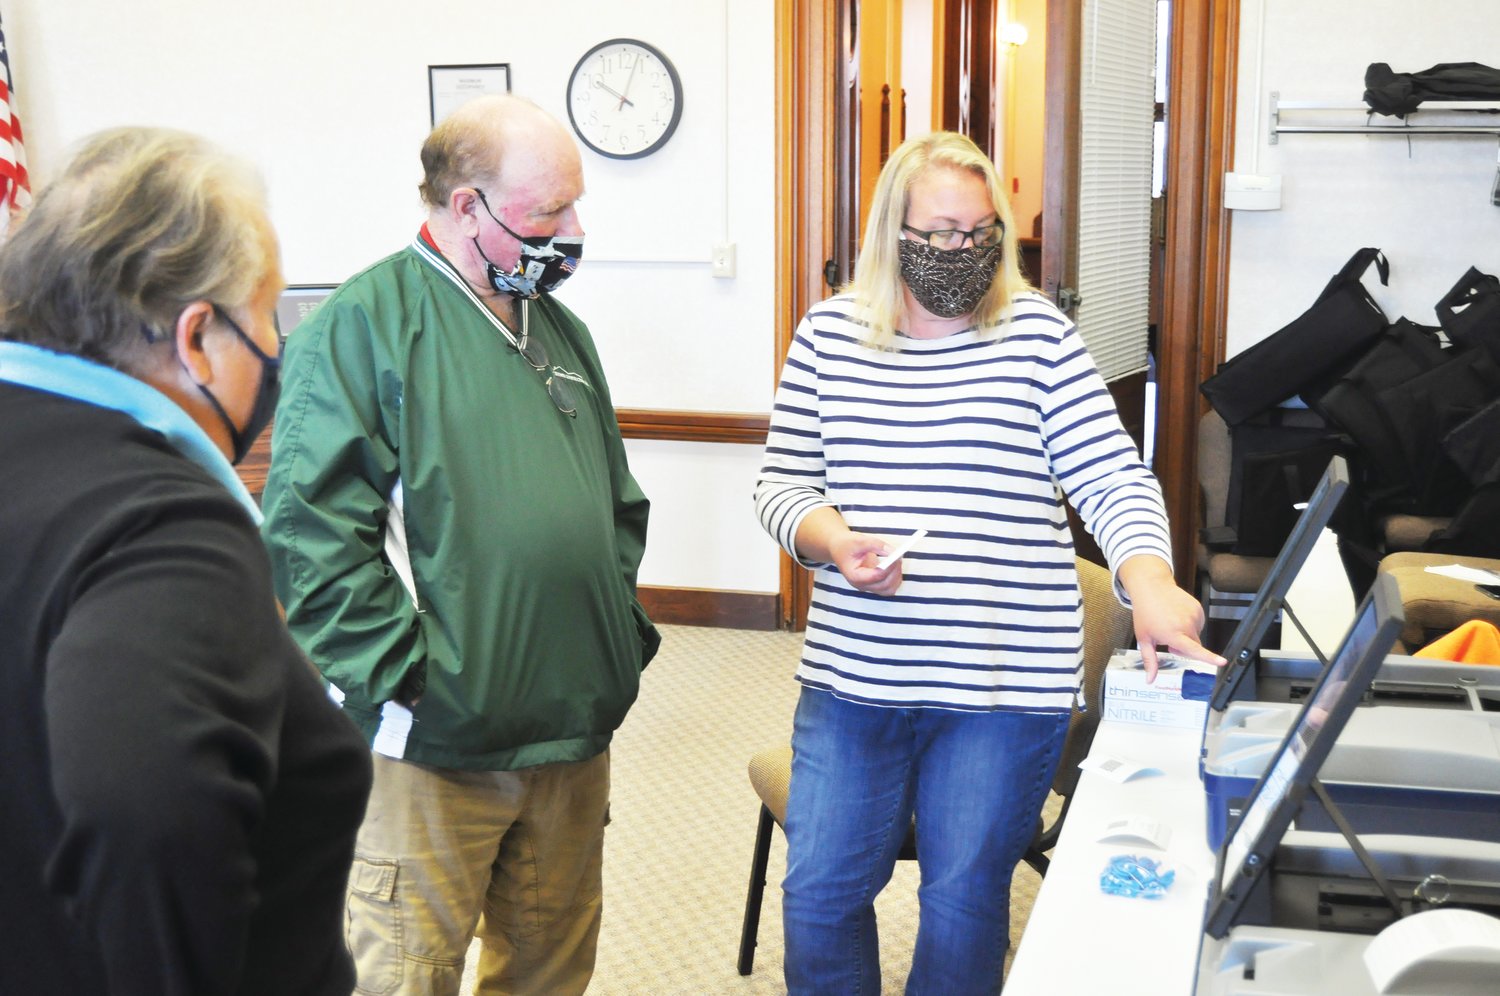 Montgomery County Clerk Karyn Douglas, right, shows a new voting machine to Election Board members Virginia Servies and Daryl Livesay Friday at the Montgomery County Courthouse. The board members observed the required public test of the county's electronic voting equipment.